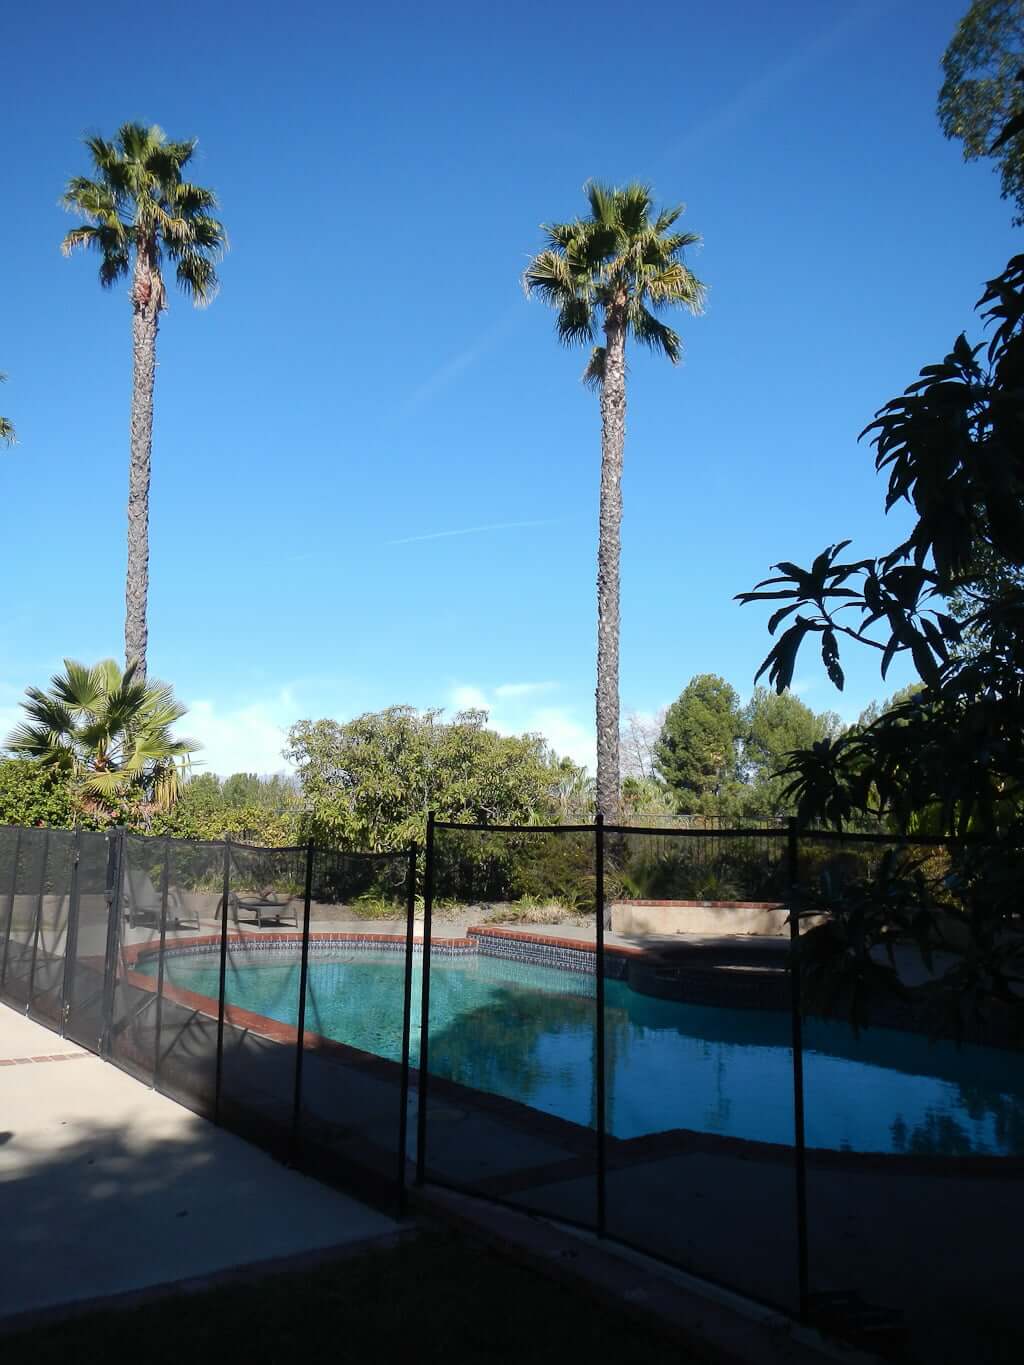 removable pool fence with pool behind it, and two fan palm trees in background